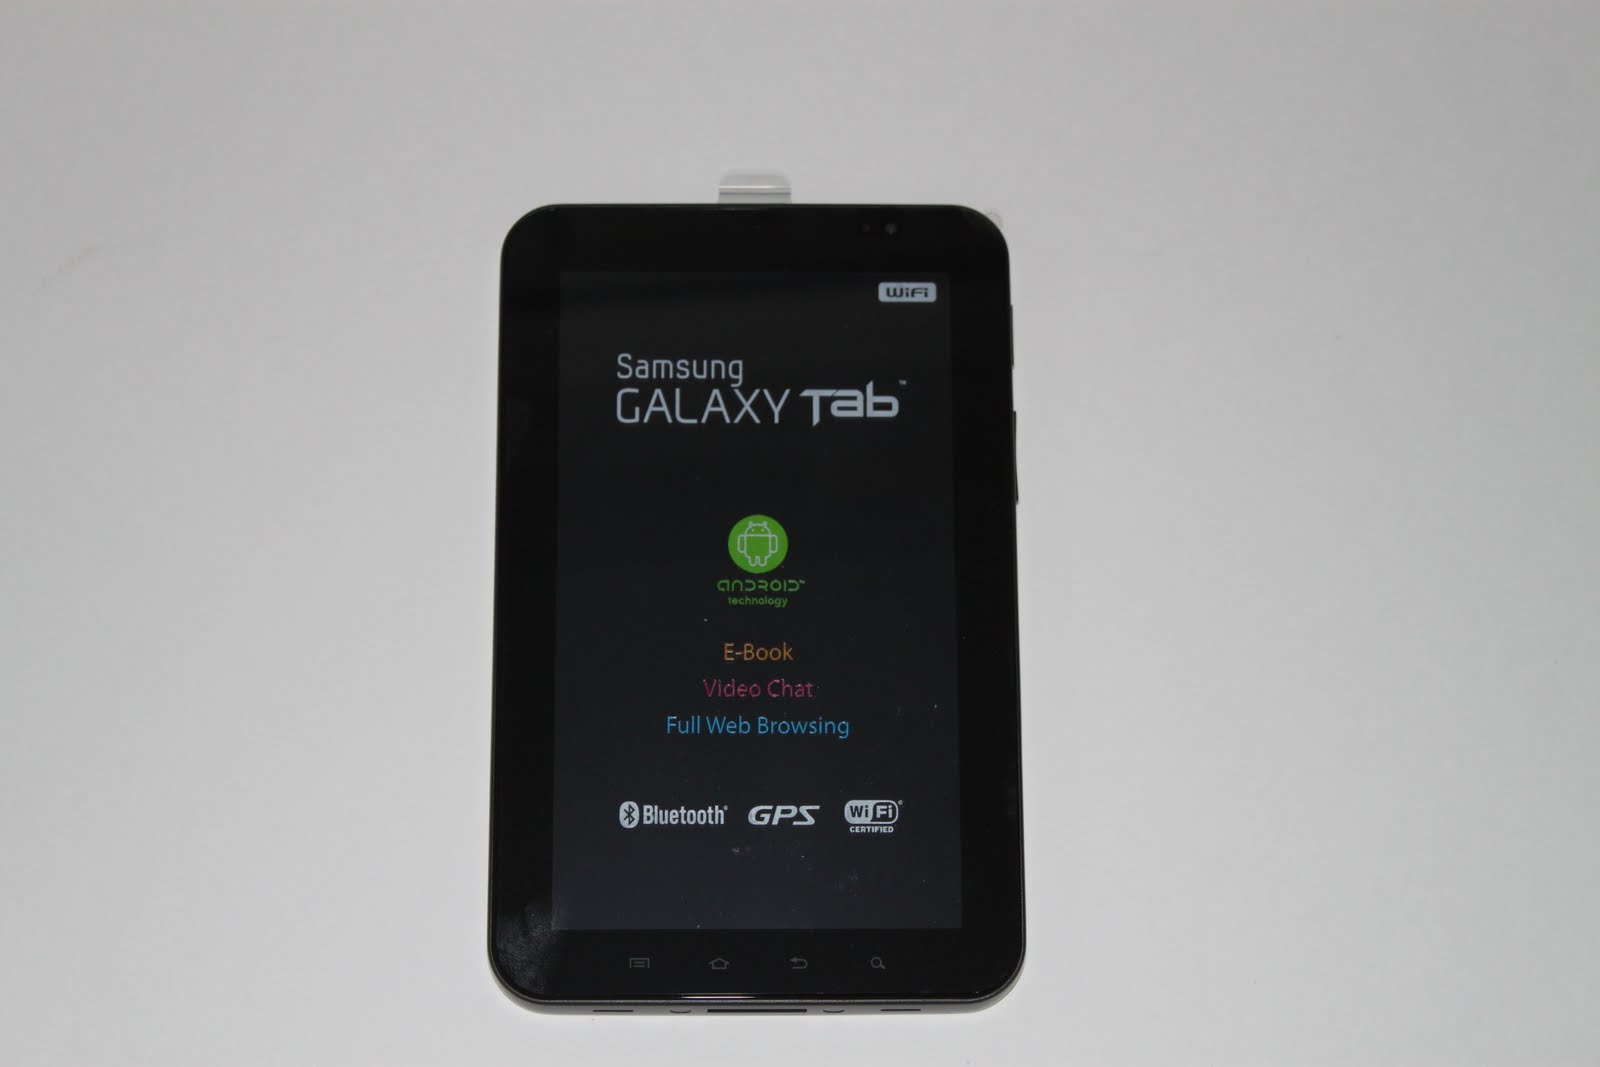 ... Plus: Samsung Galaxy Tab 7 and Galaxy Tab 10.1 Android Tablet Review